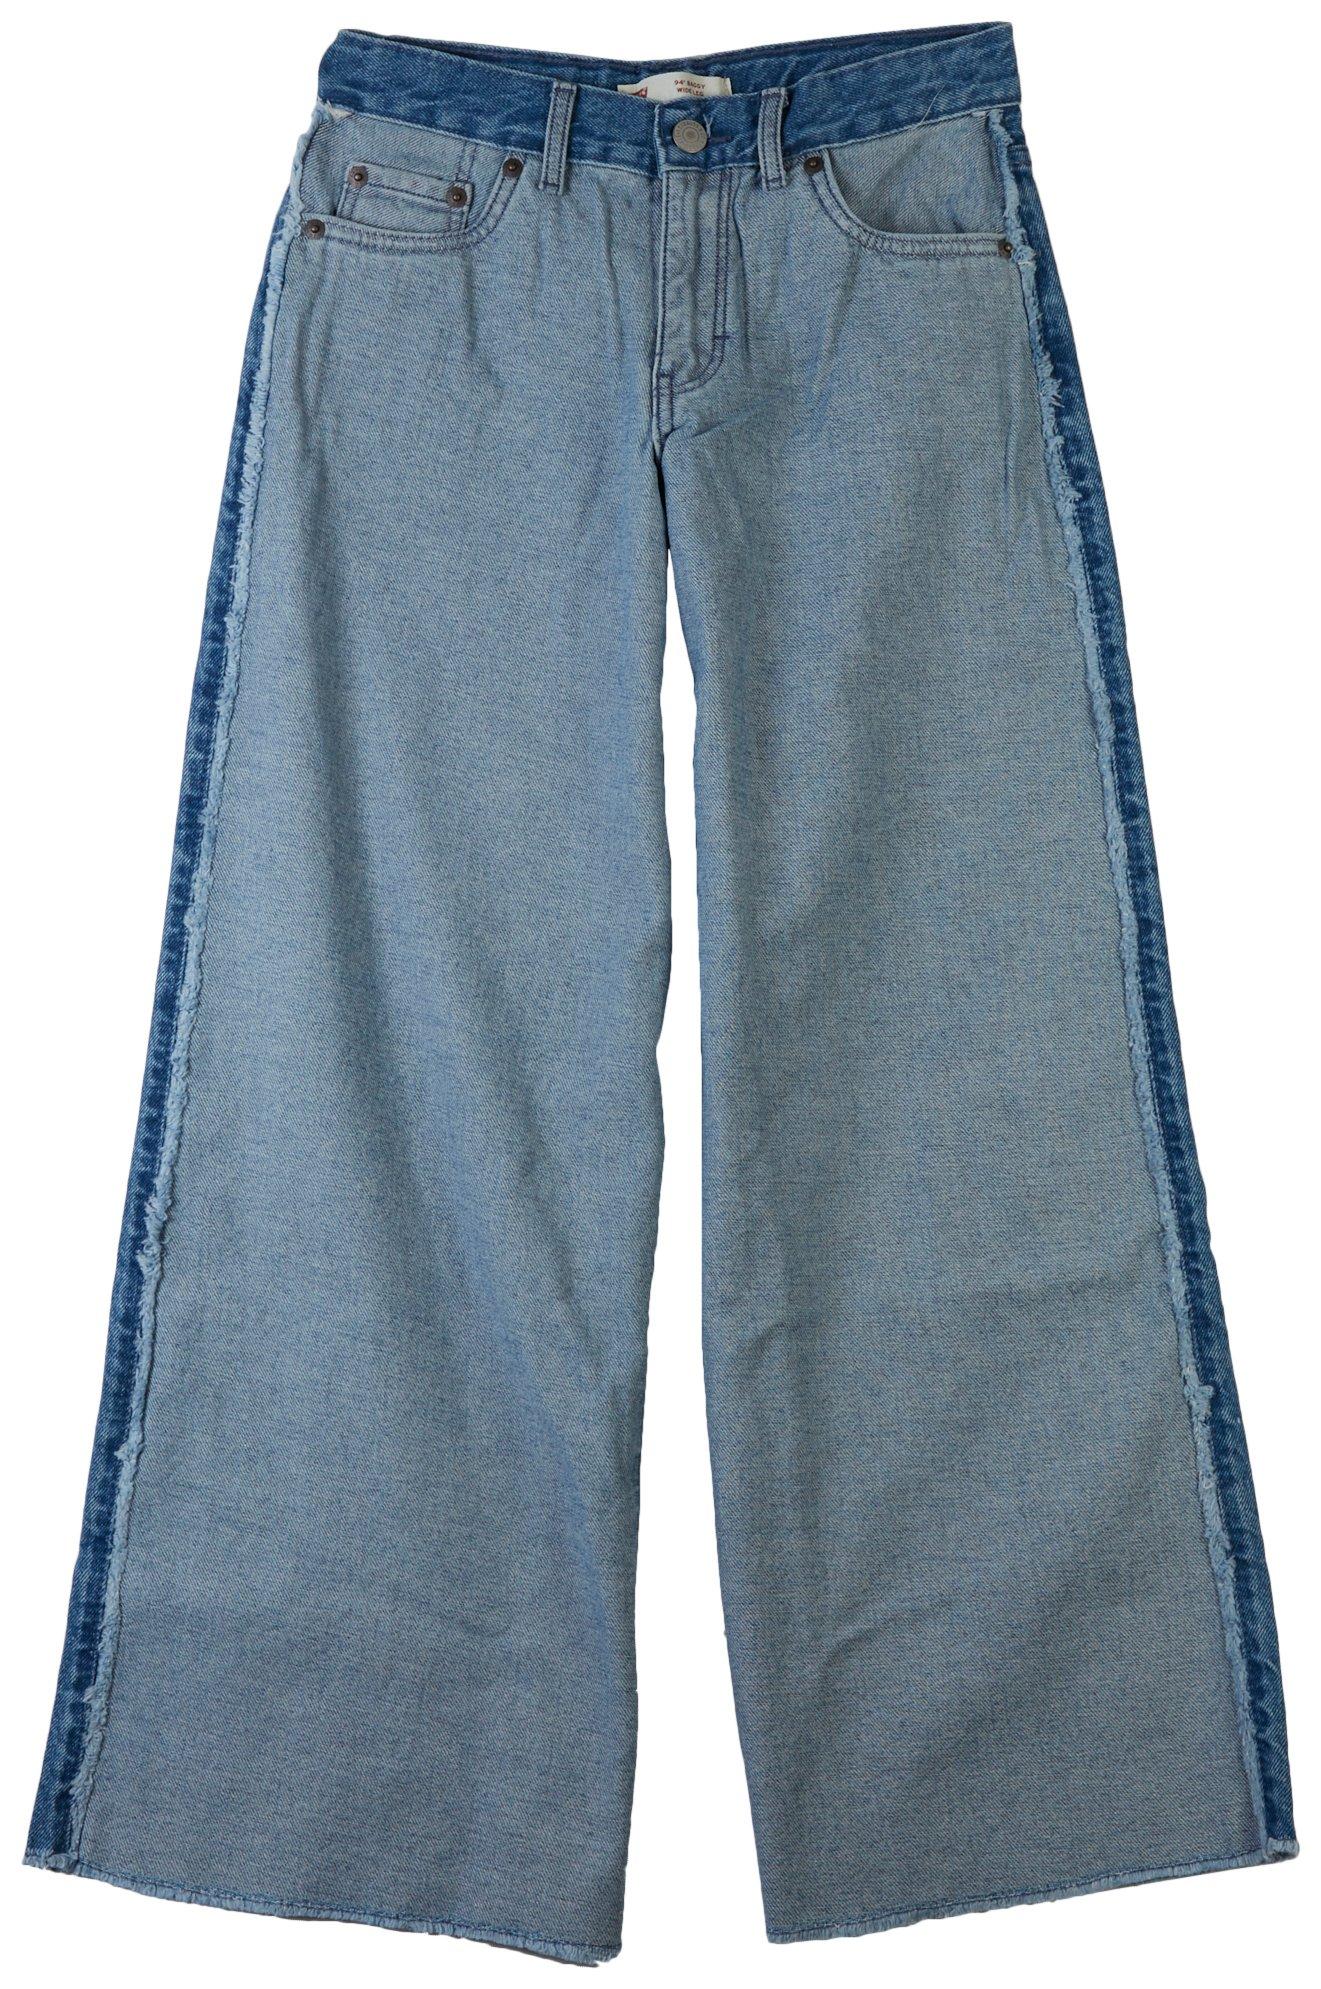 Big Girls Mid-Rise Inside Out Jeans